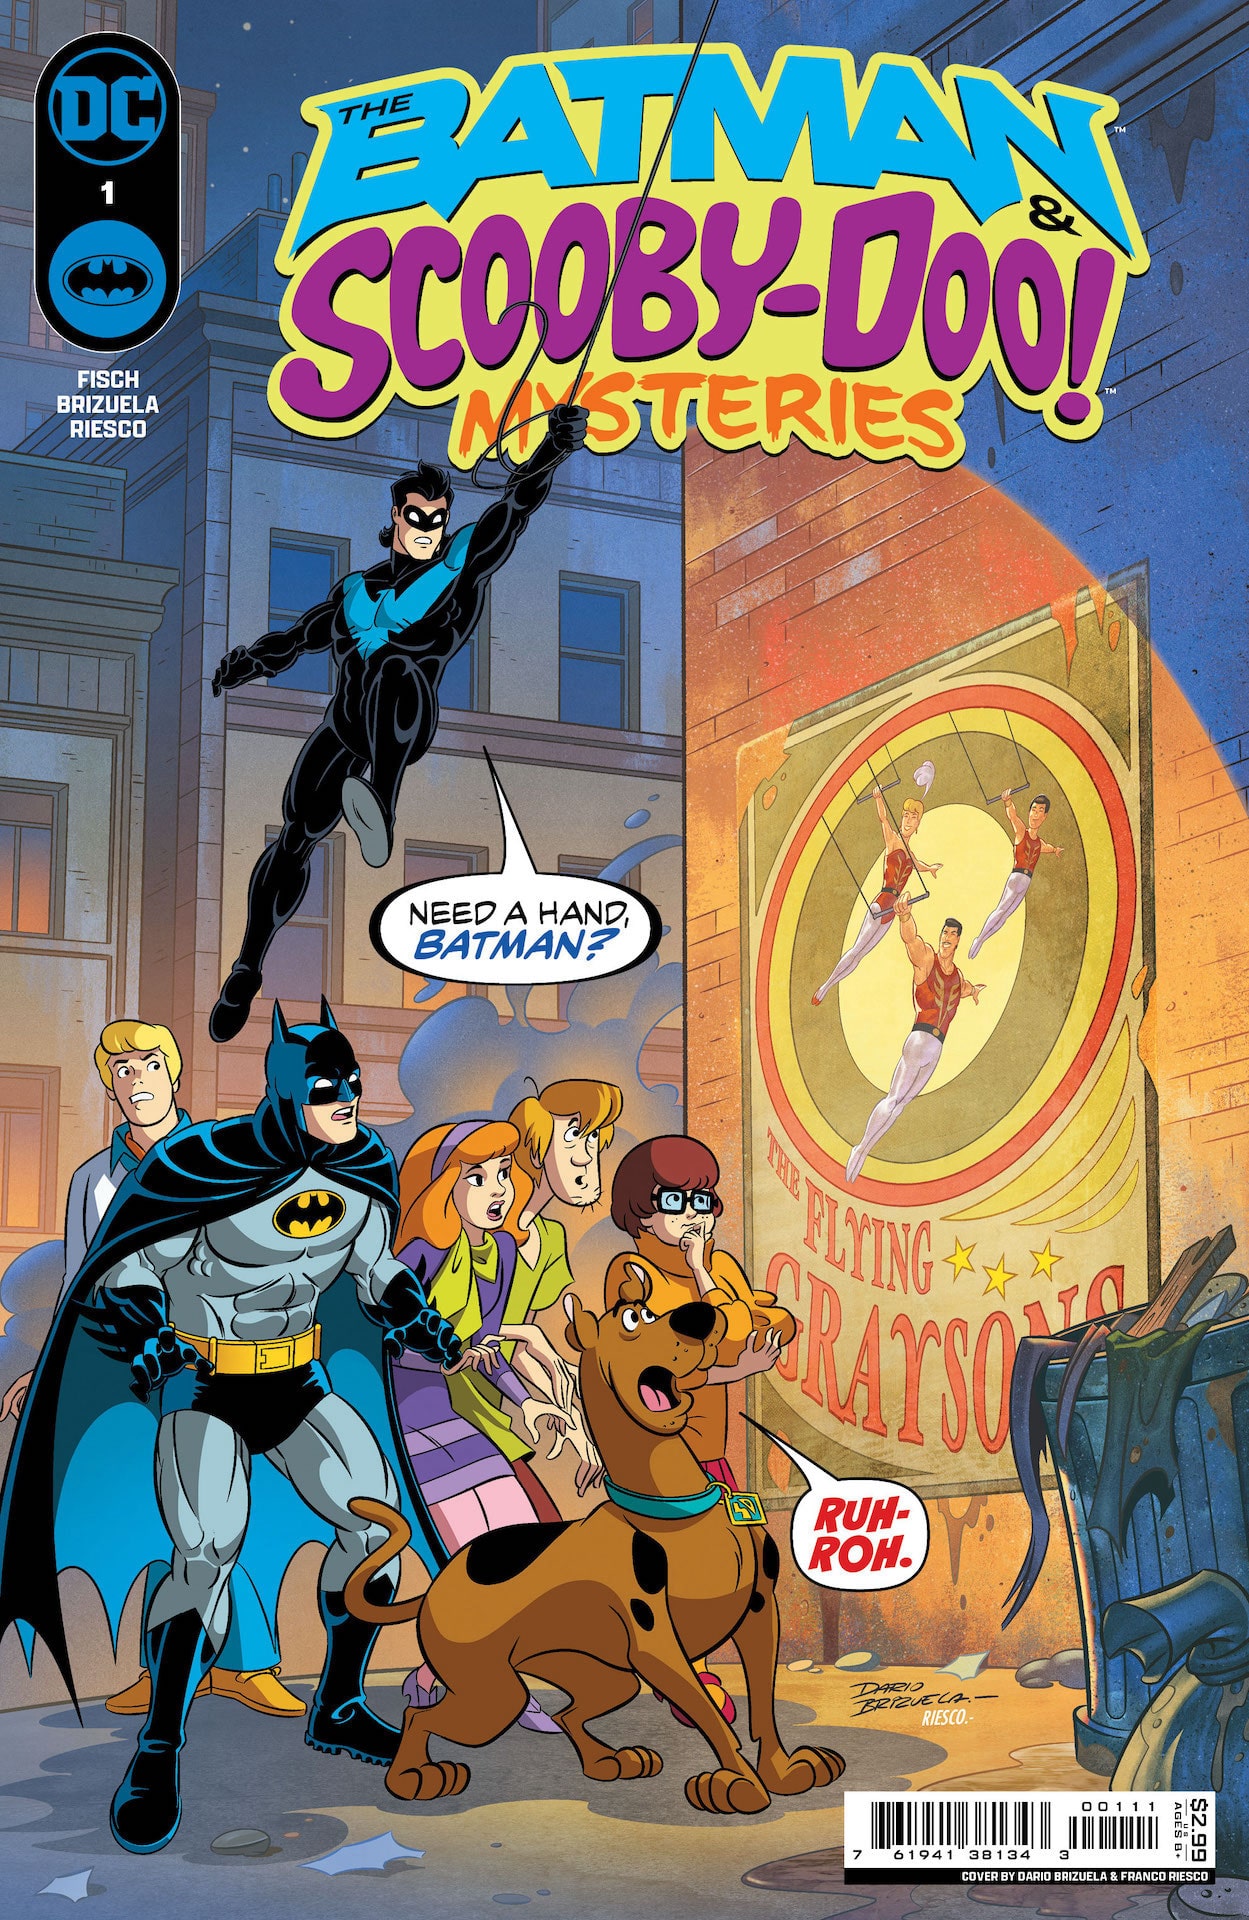 DC Preview: The Batman & Scooby-Doo Mysteries #1